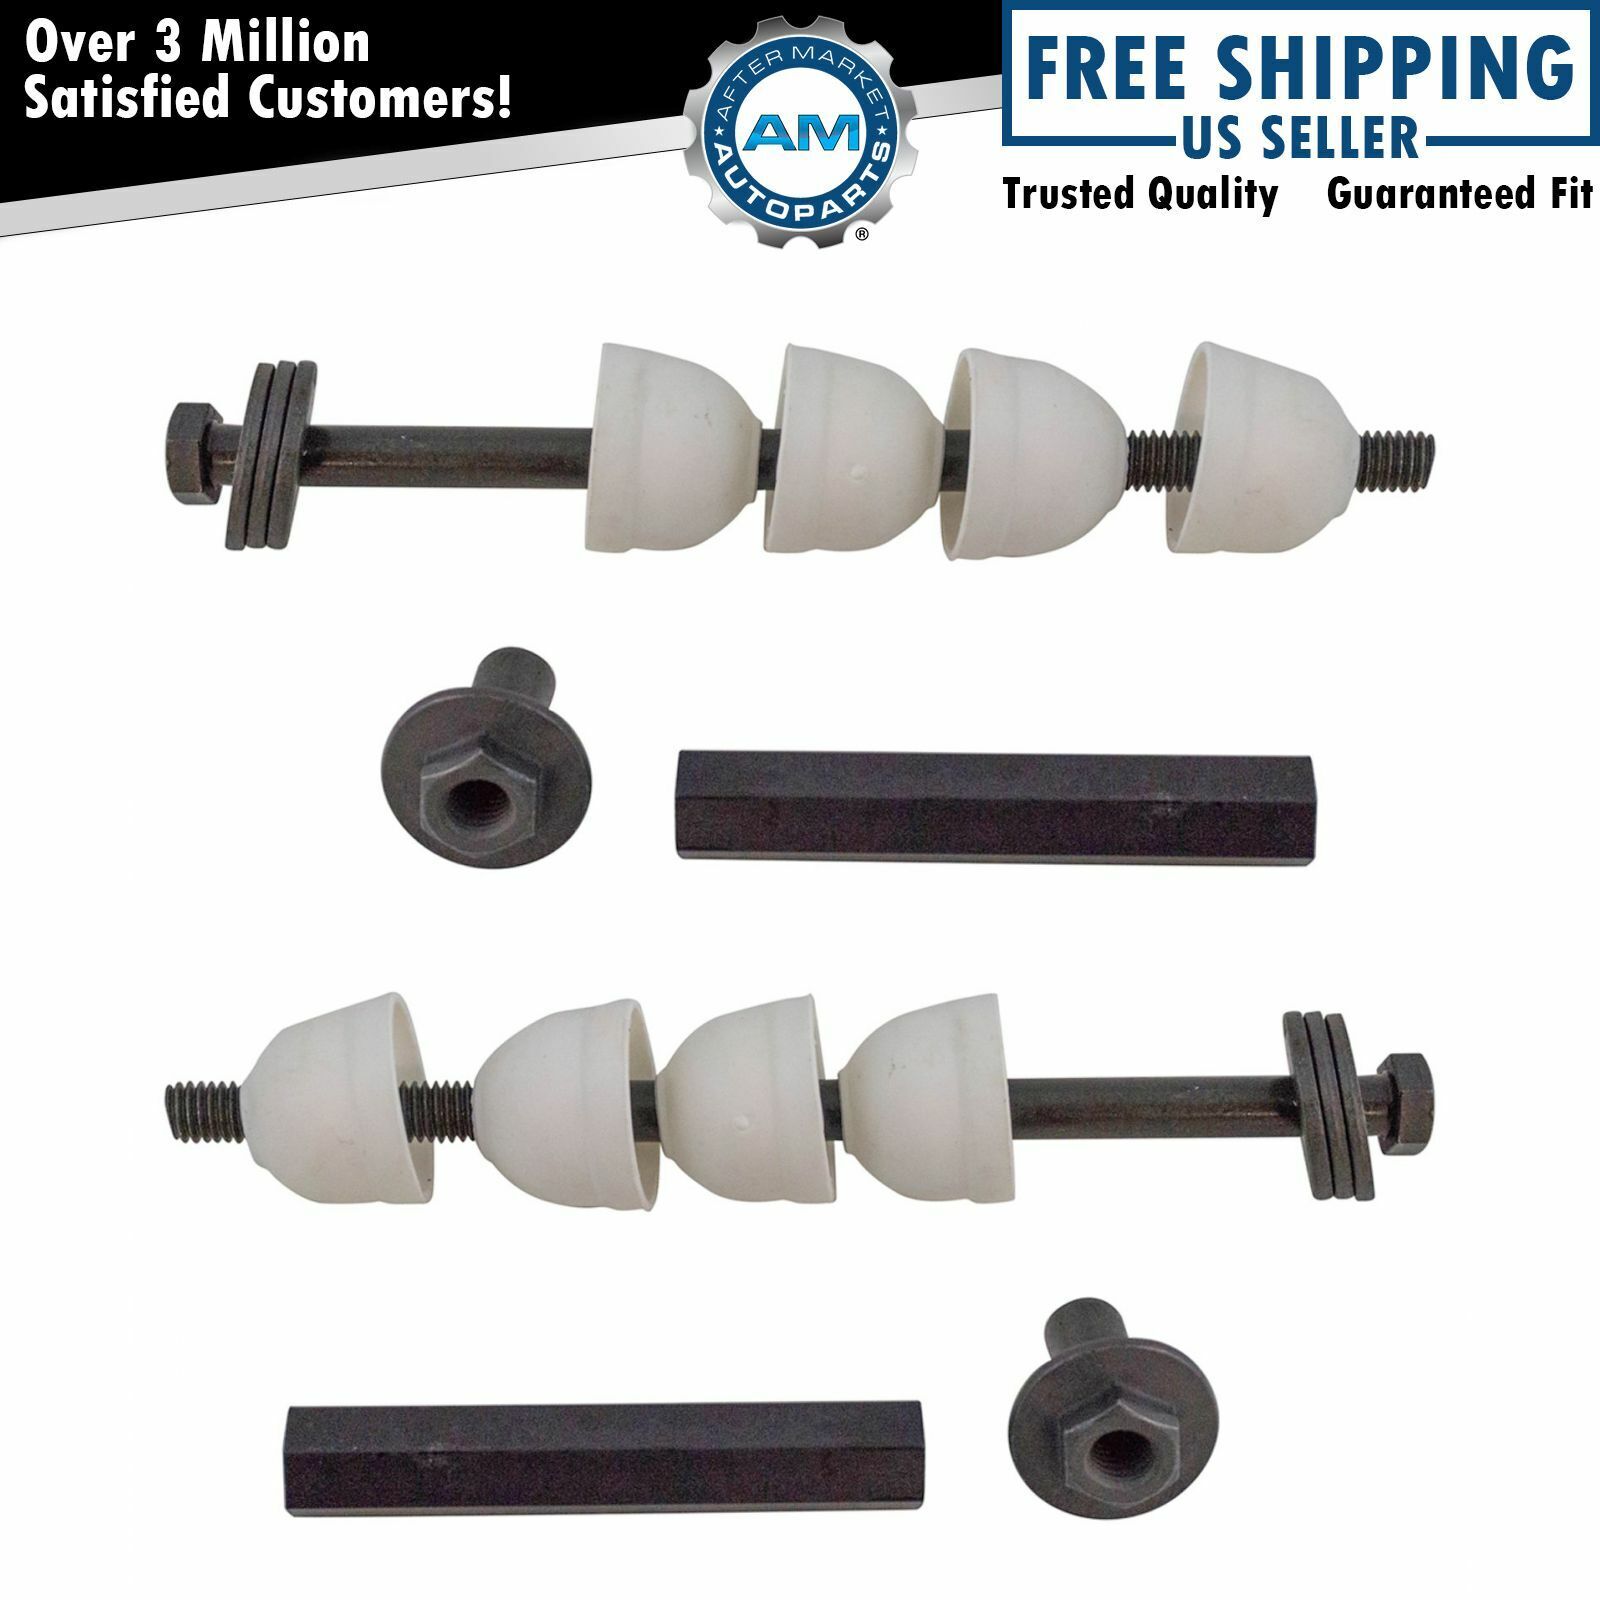 Moog K700538 Front Sway Bar End Link Pair LH & RH Sides for Buick Chevy GMC Ford